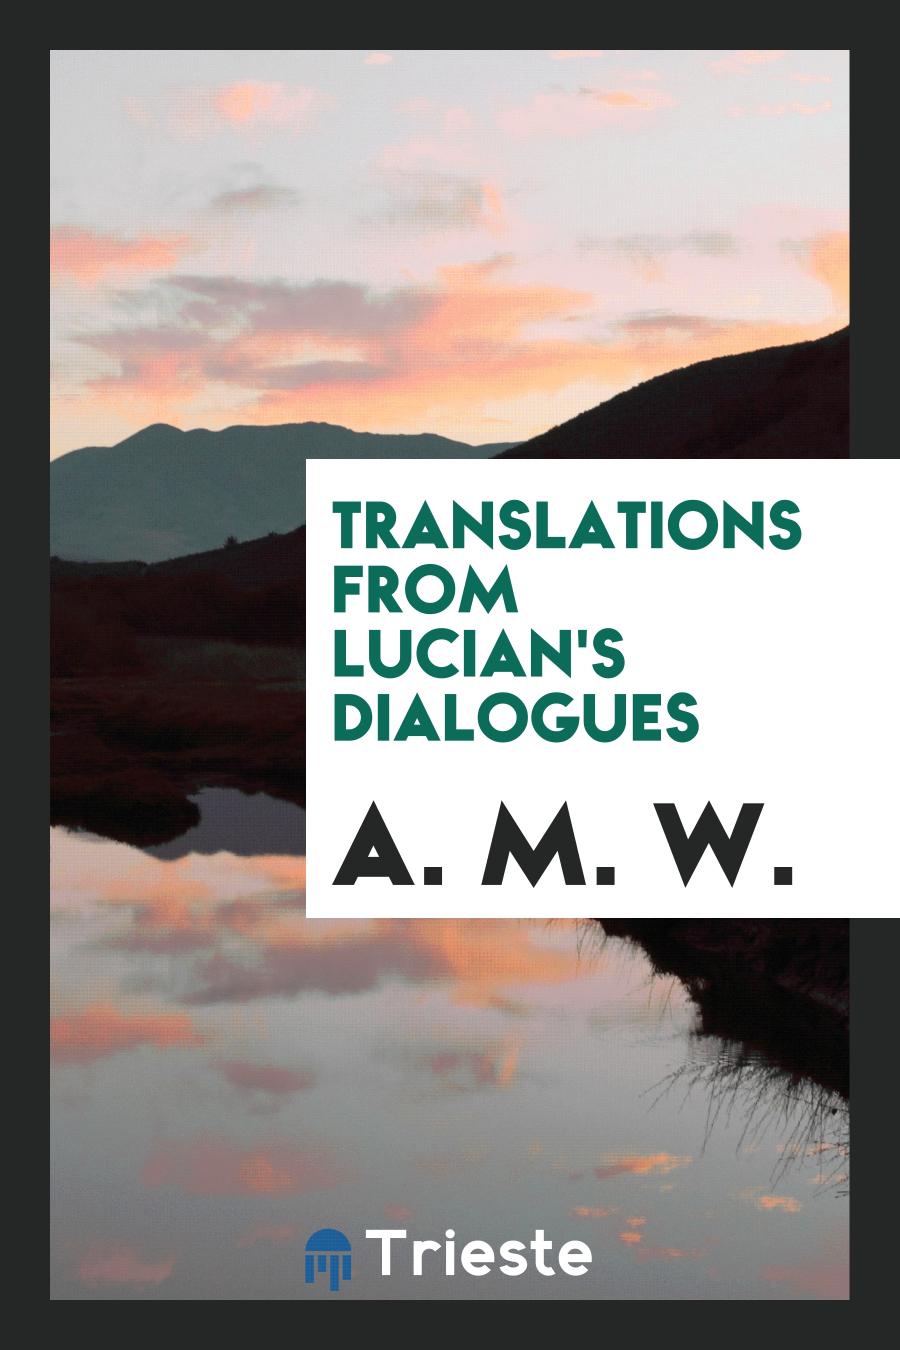 Translations from Lucian's dialogues